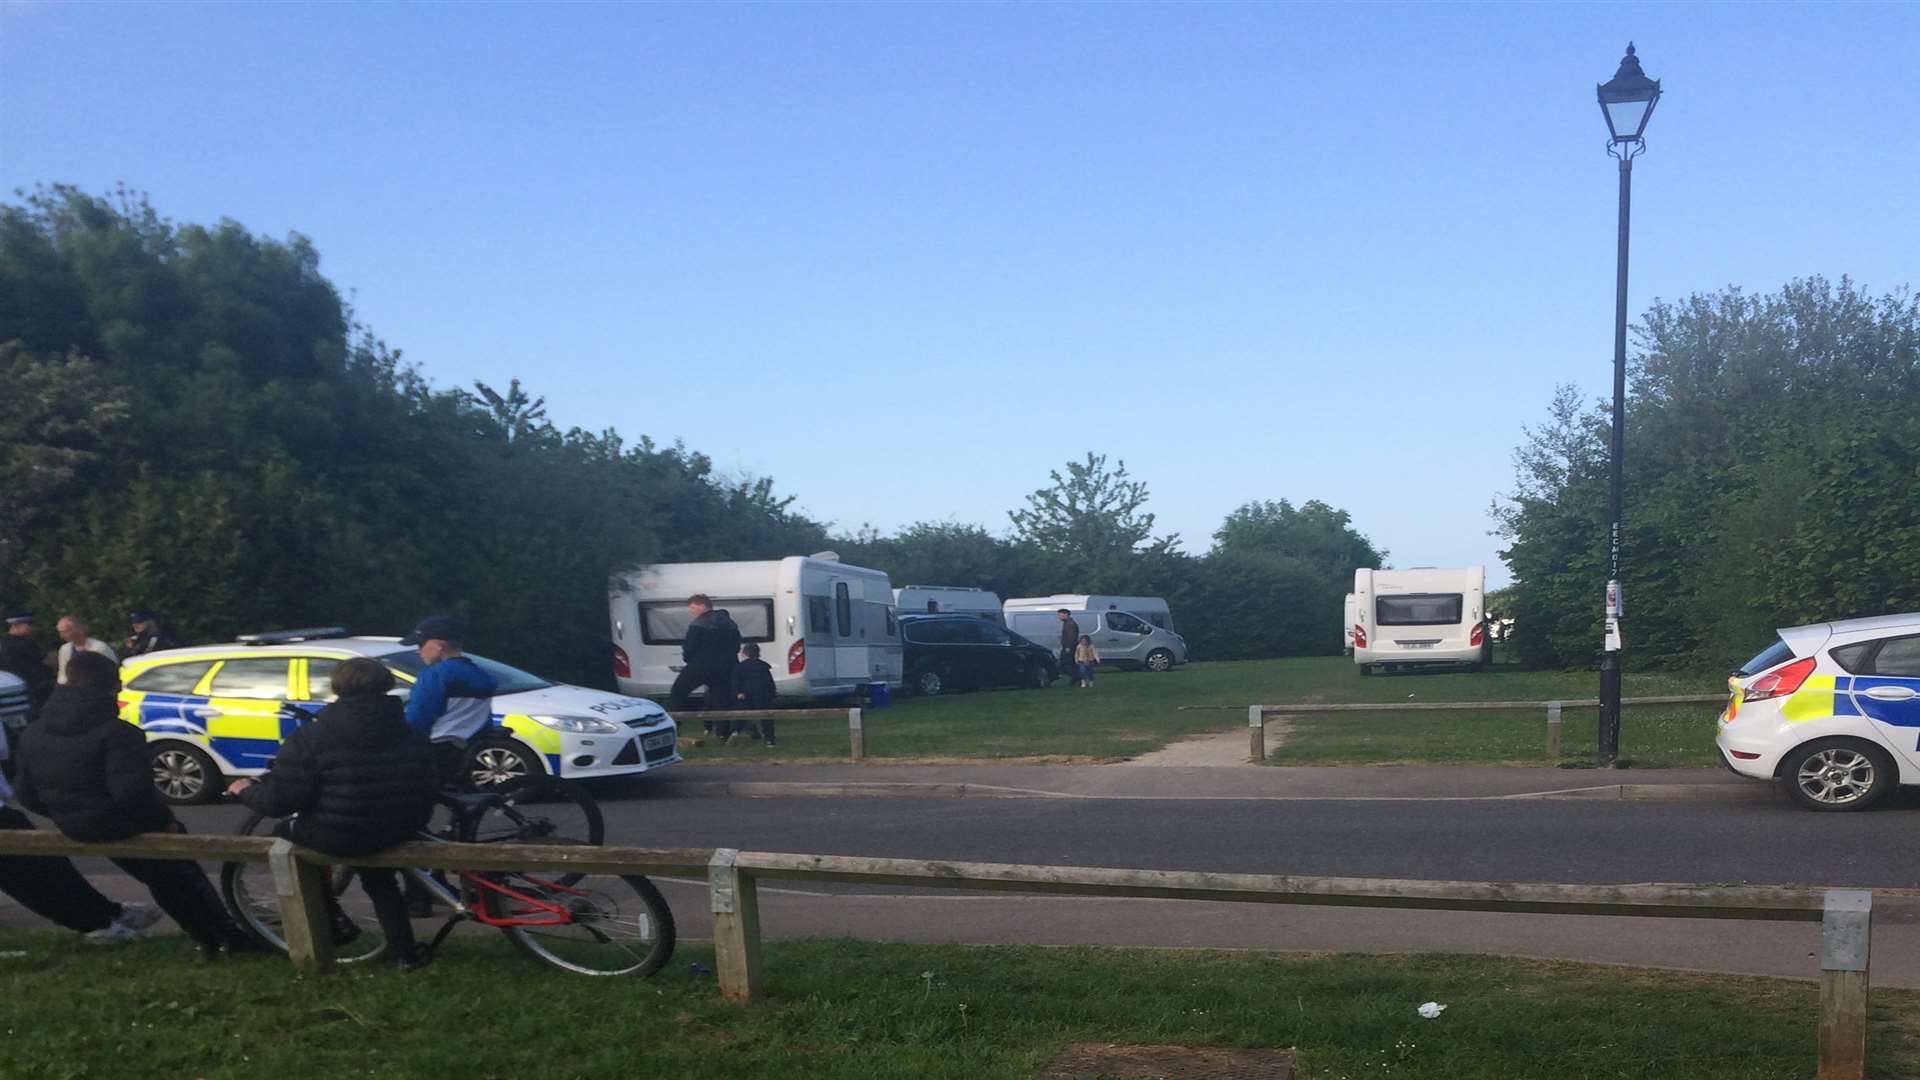 The travellers pitched up on land running off Argent Way